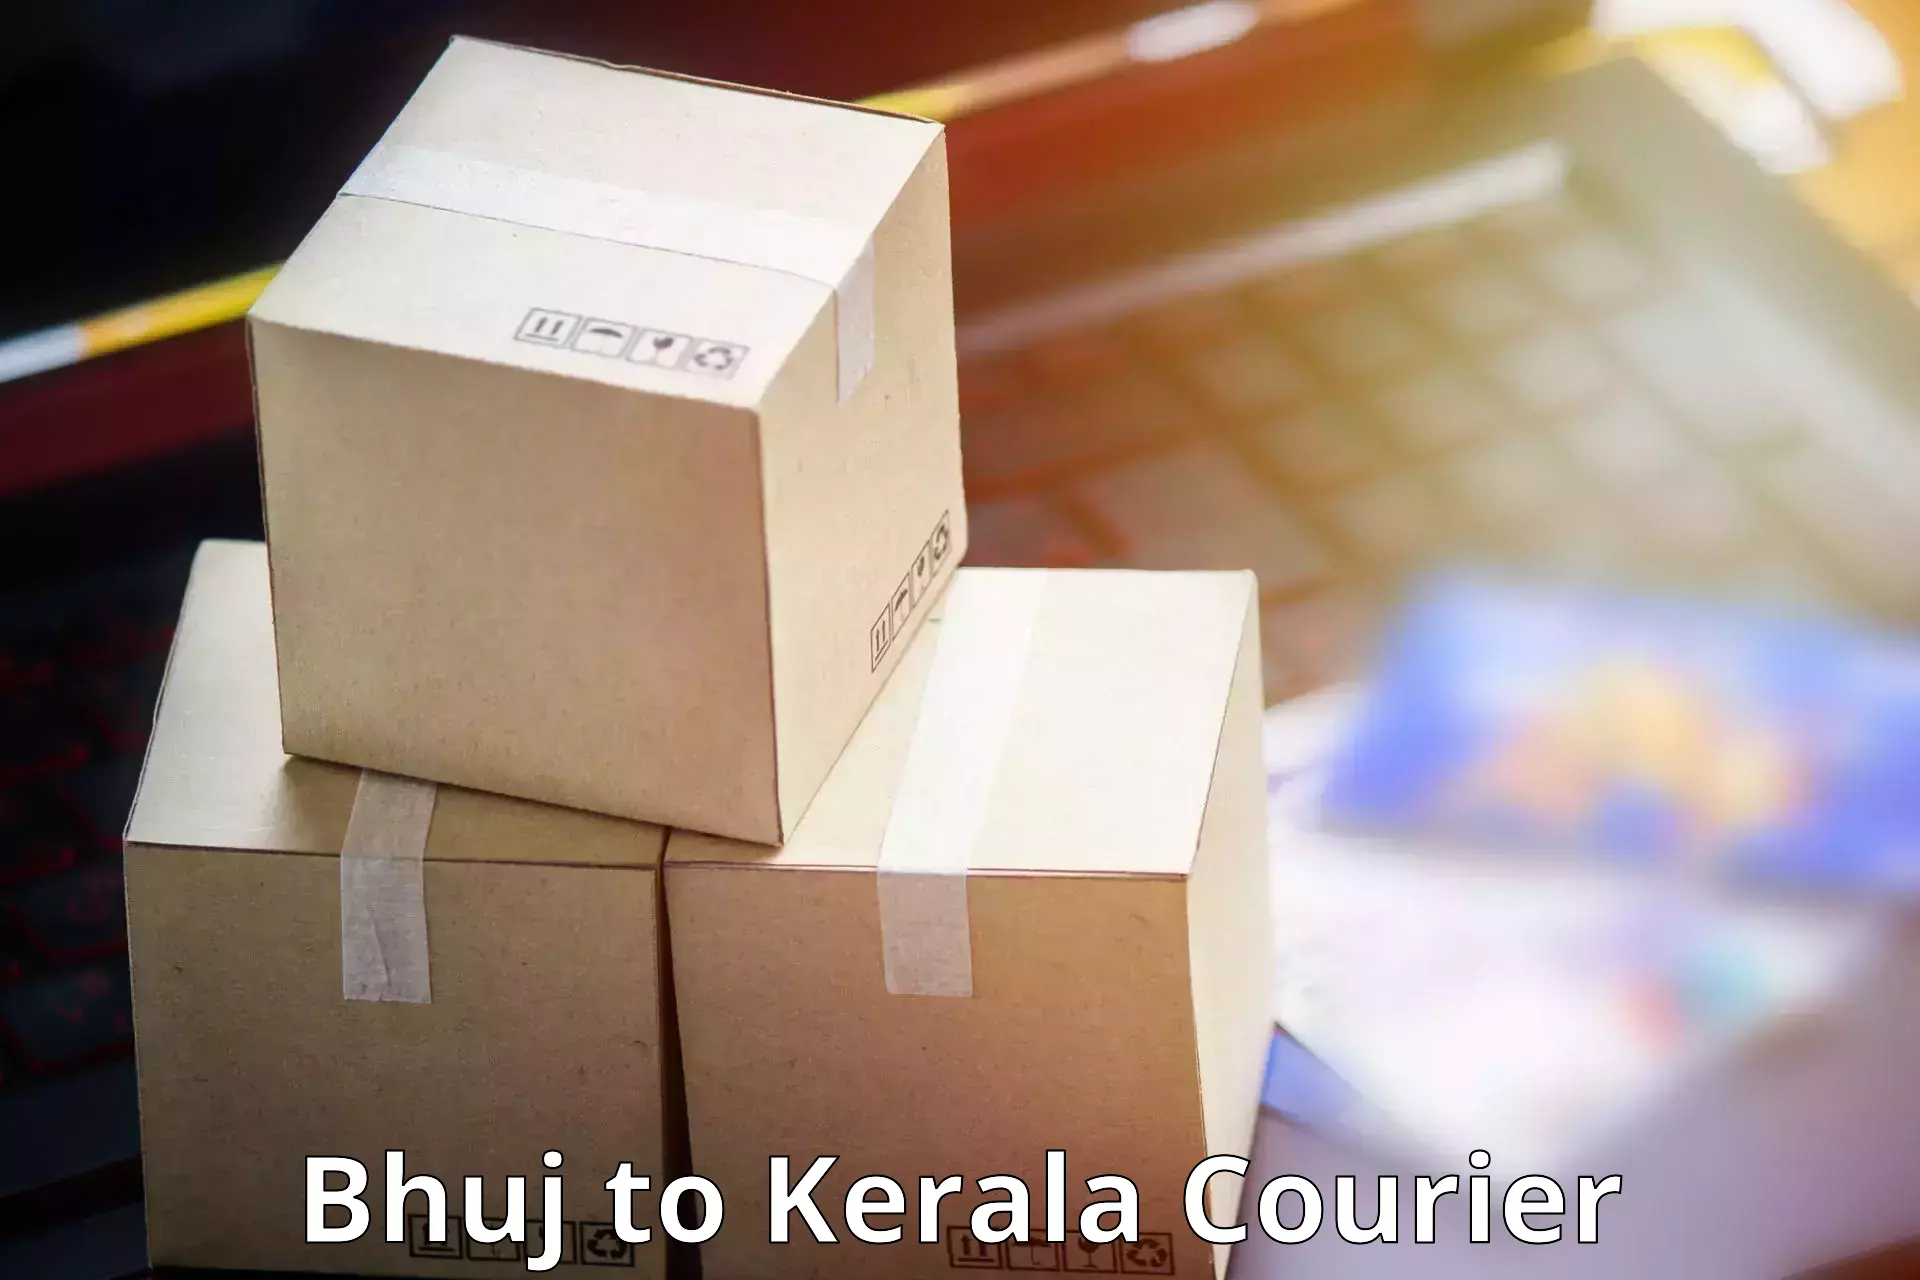 Professional courier services Bhuj to Cochin University of Science and Technology